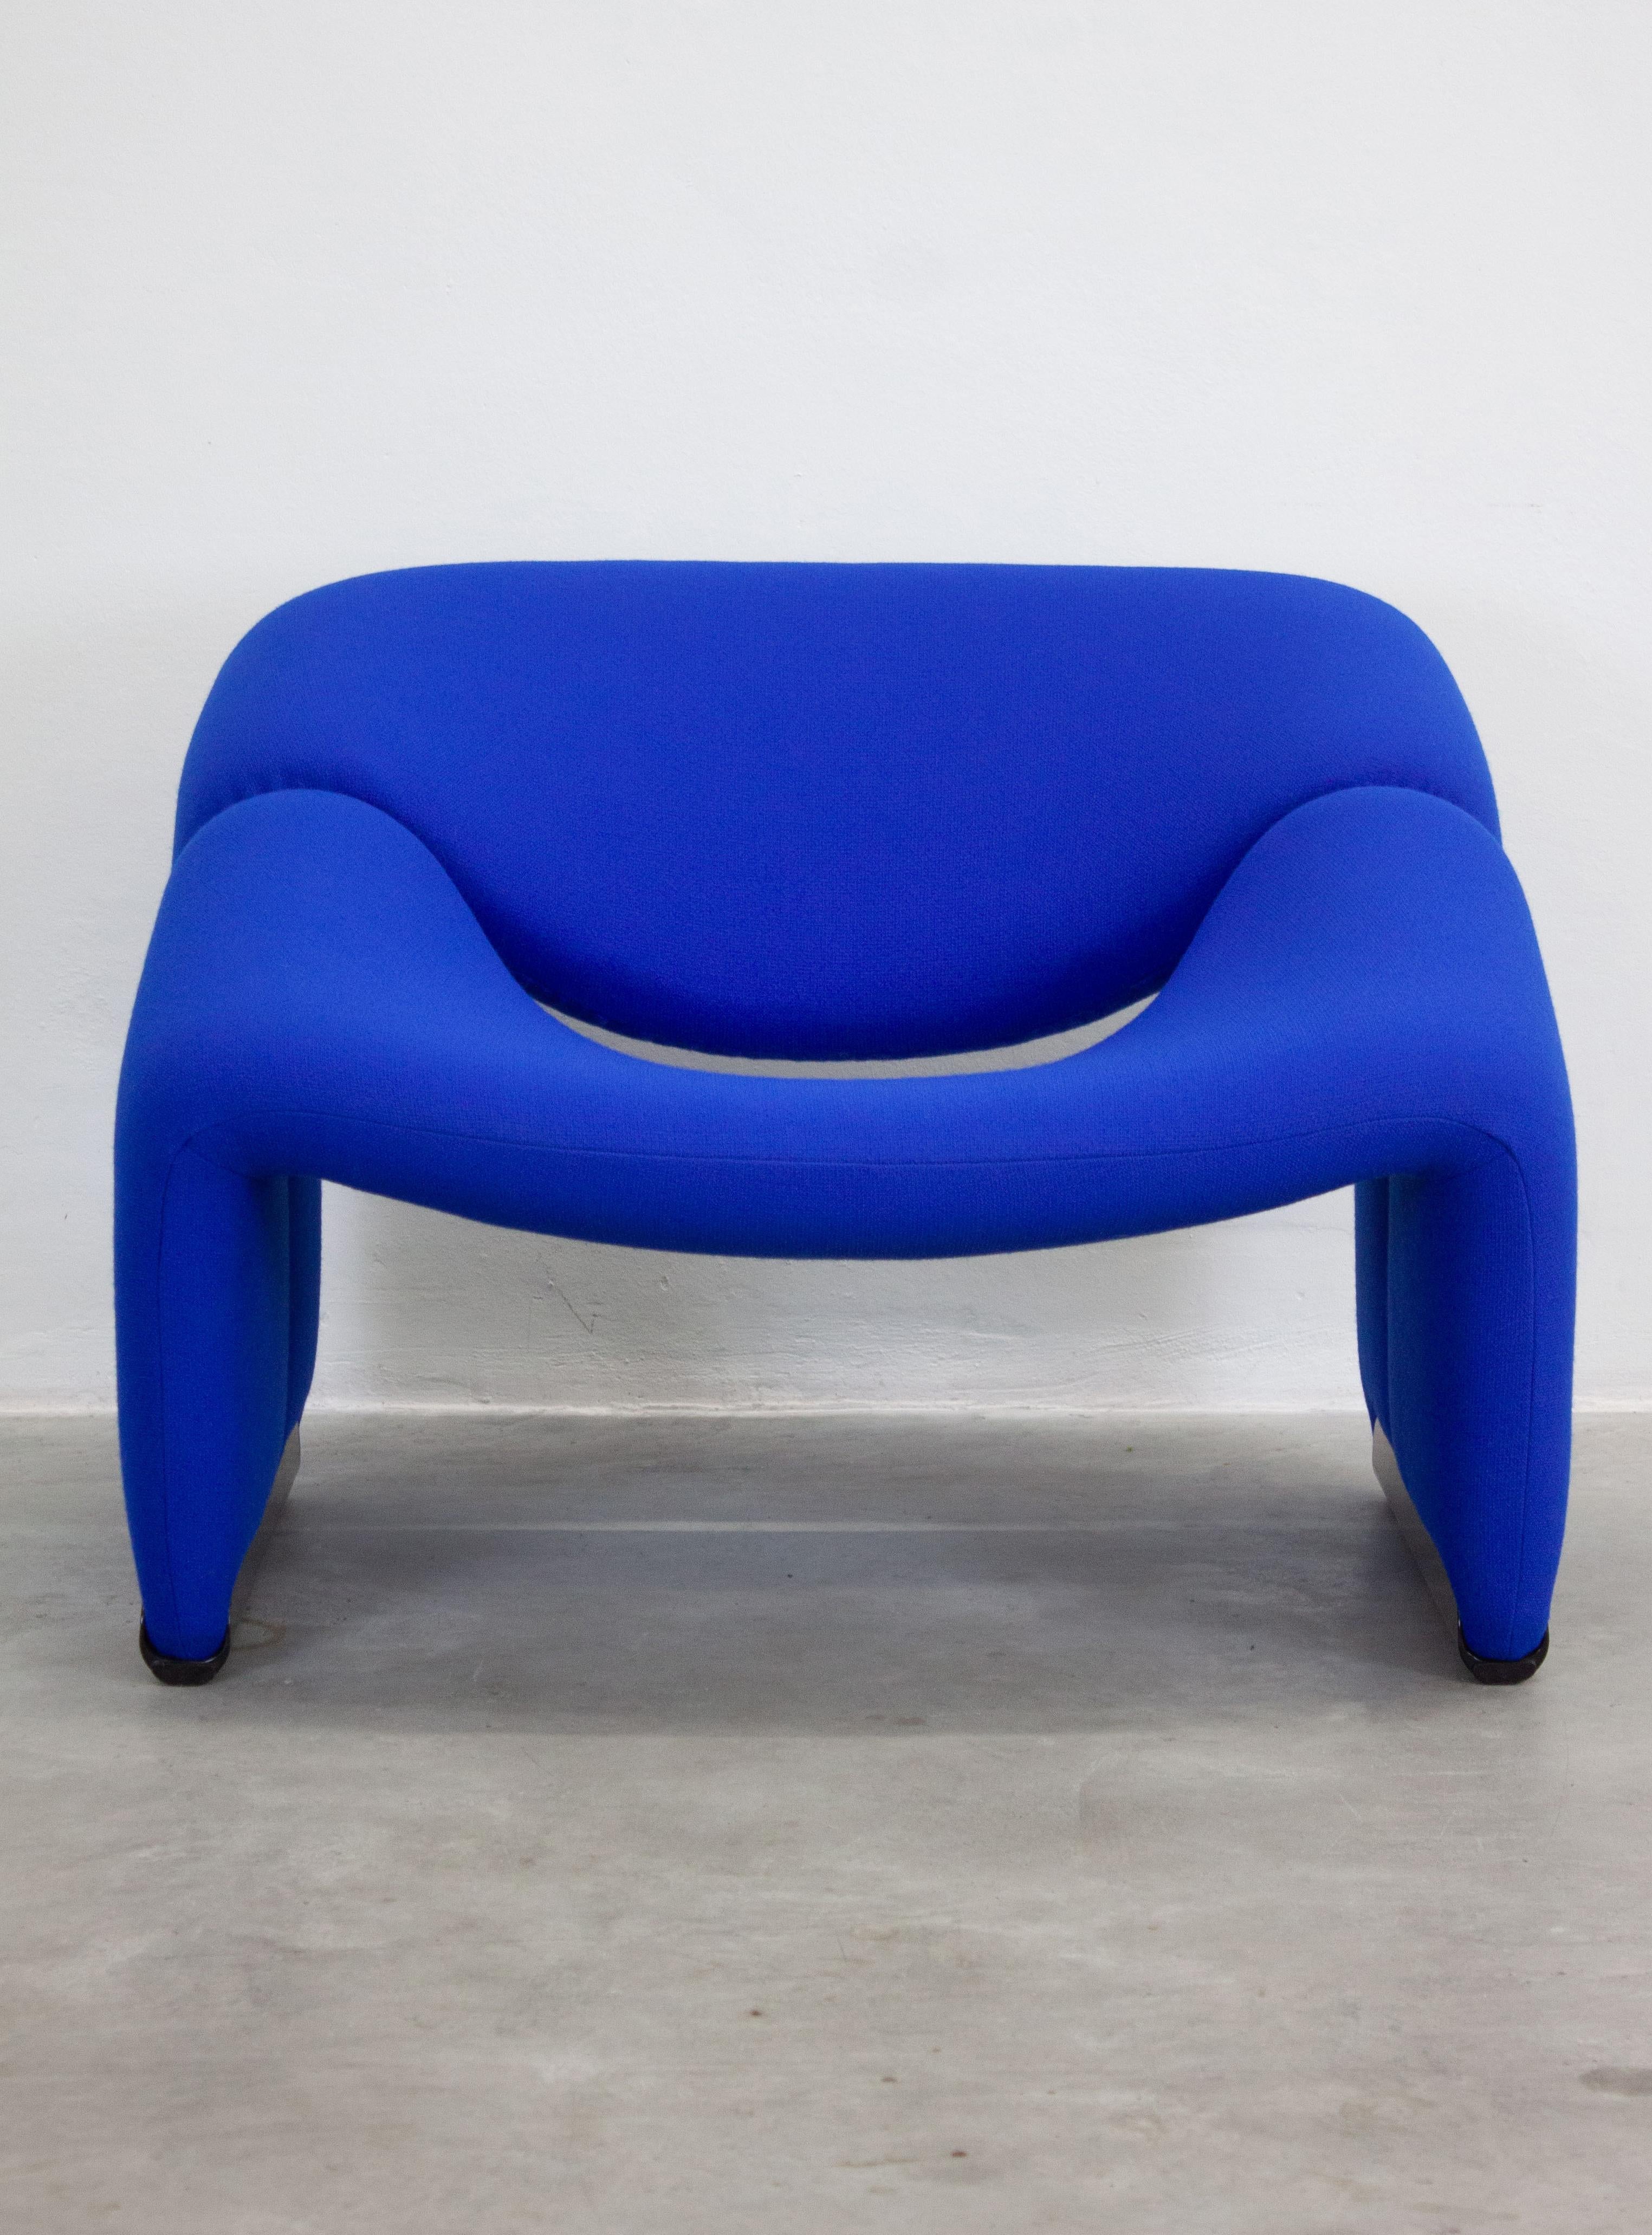 20th Century Artifort Groovy F598 Lounge Chair by Pierre Paulin (Cobalt Blue) For Sale